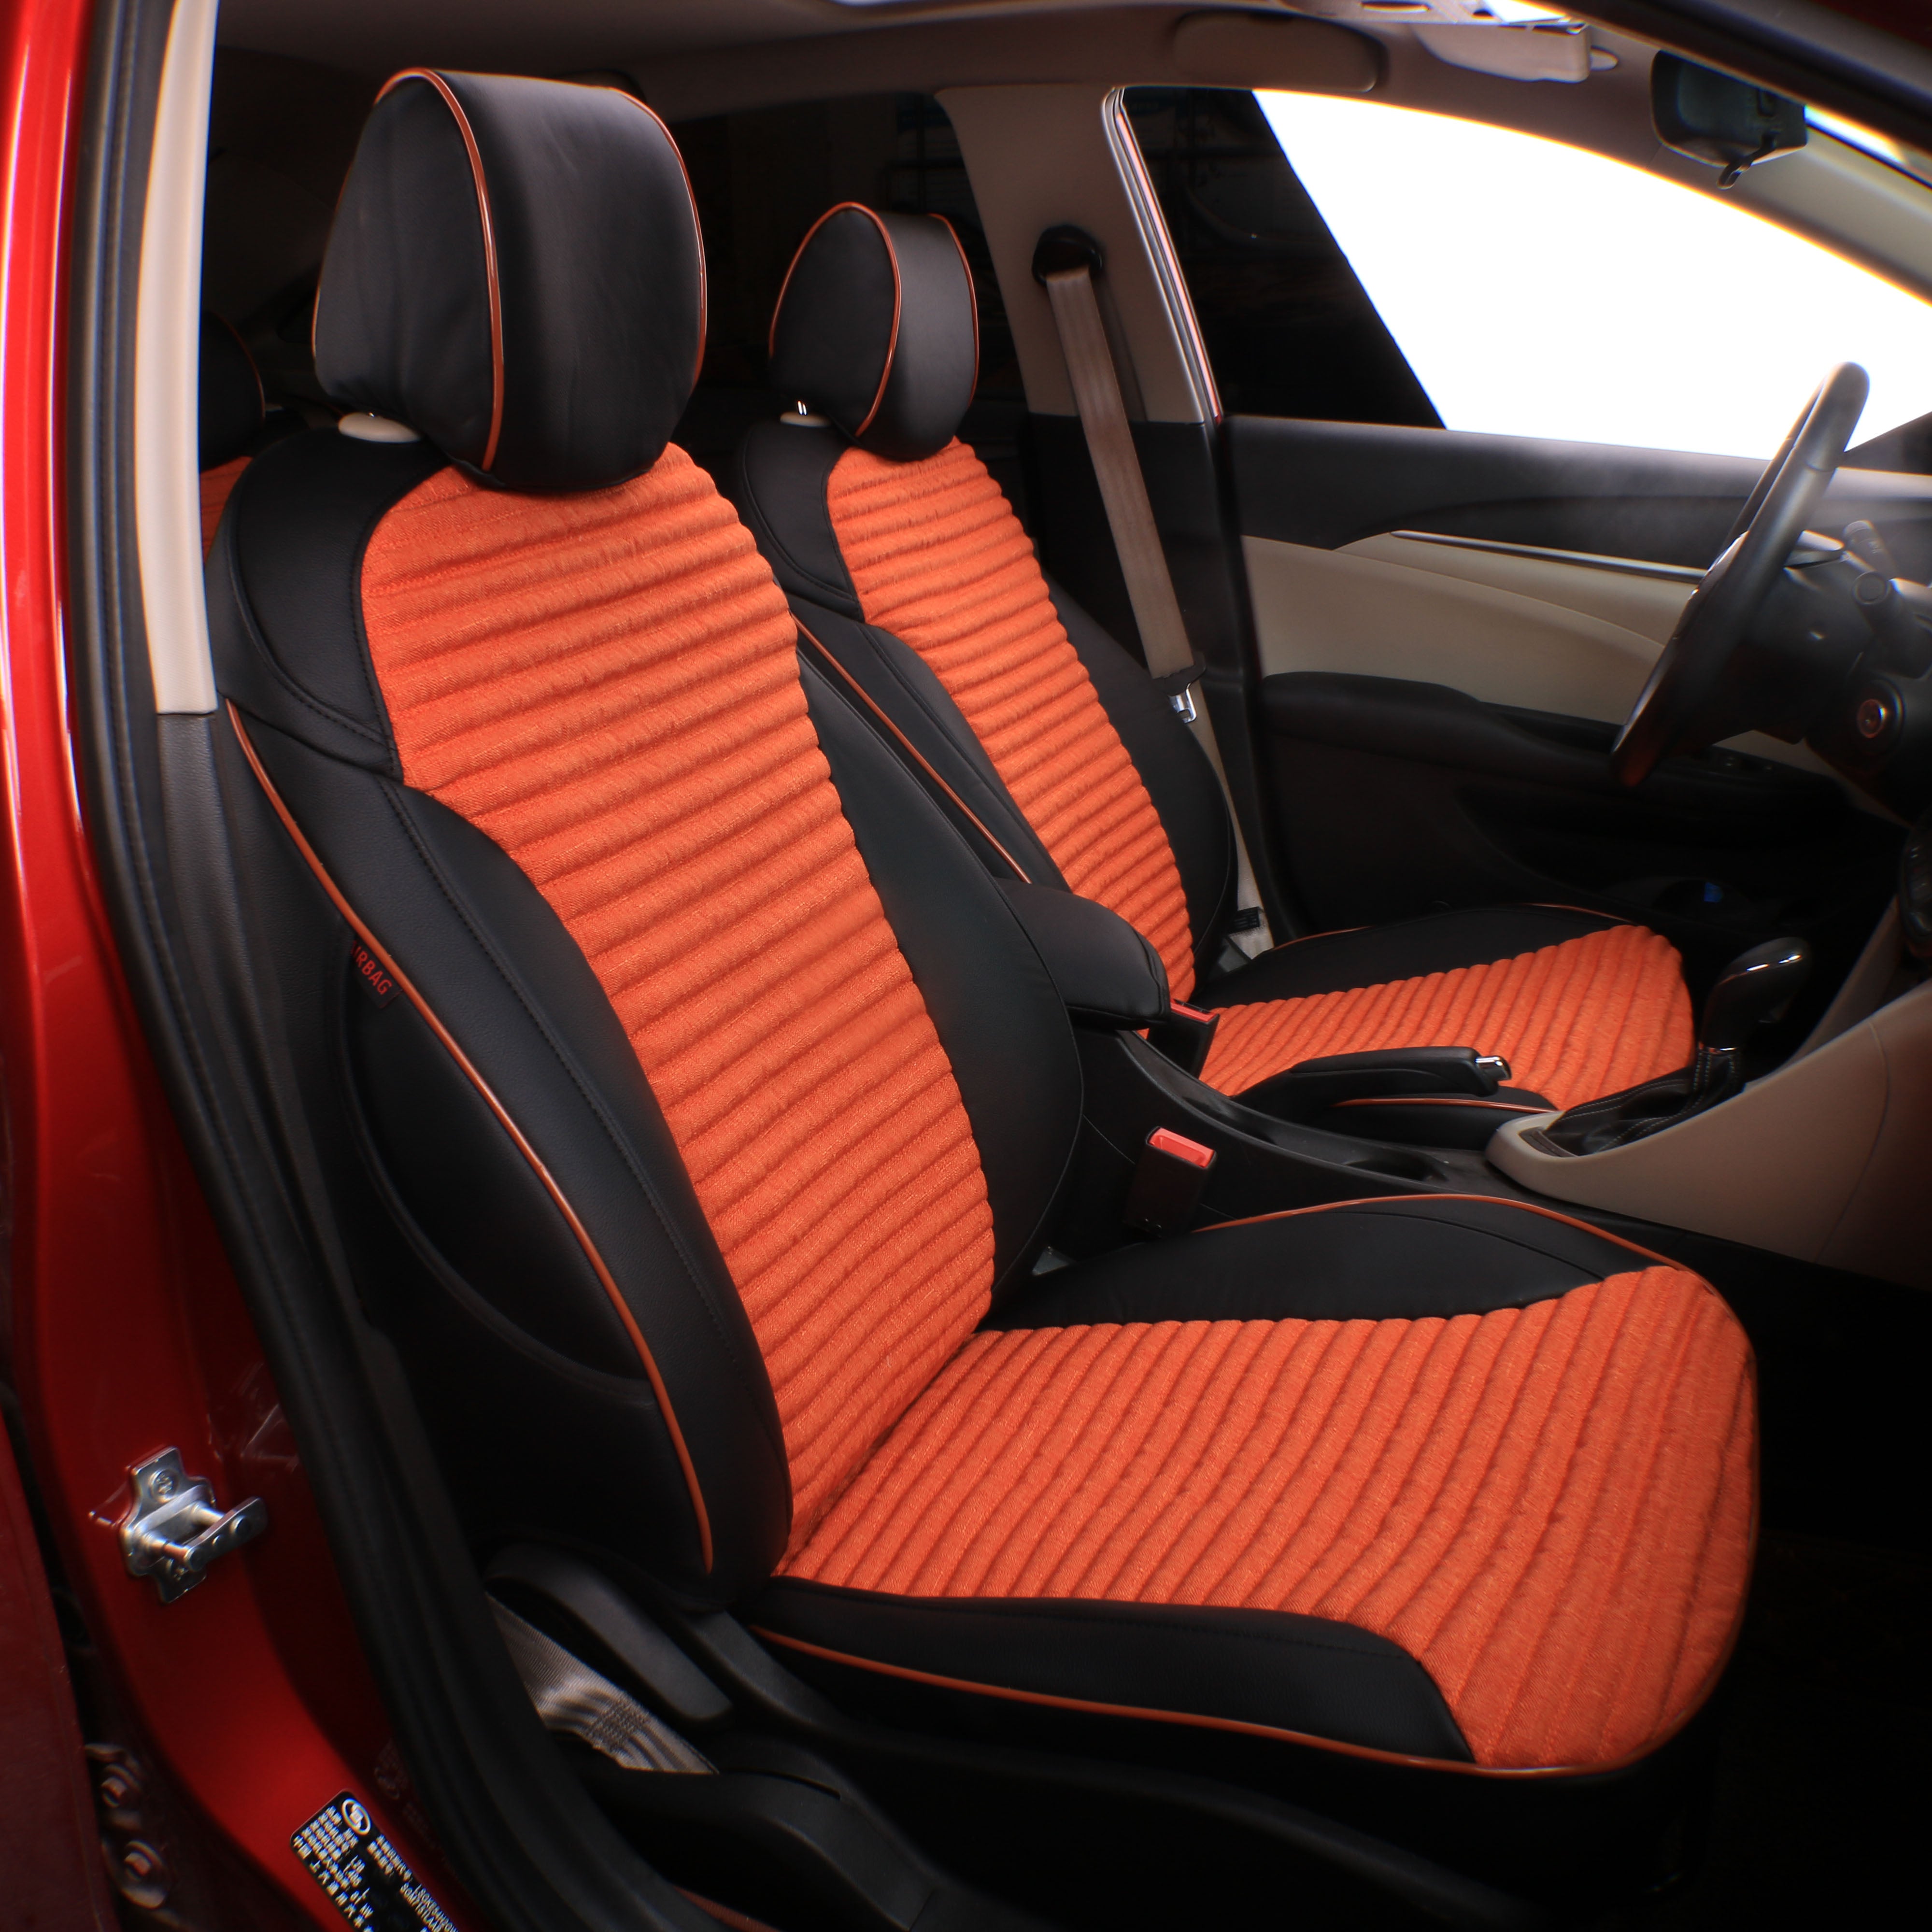 Nappa Leathers Seat Cover